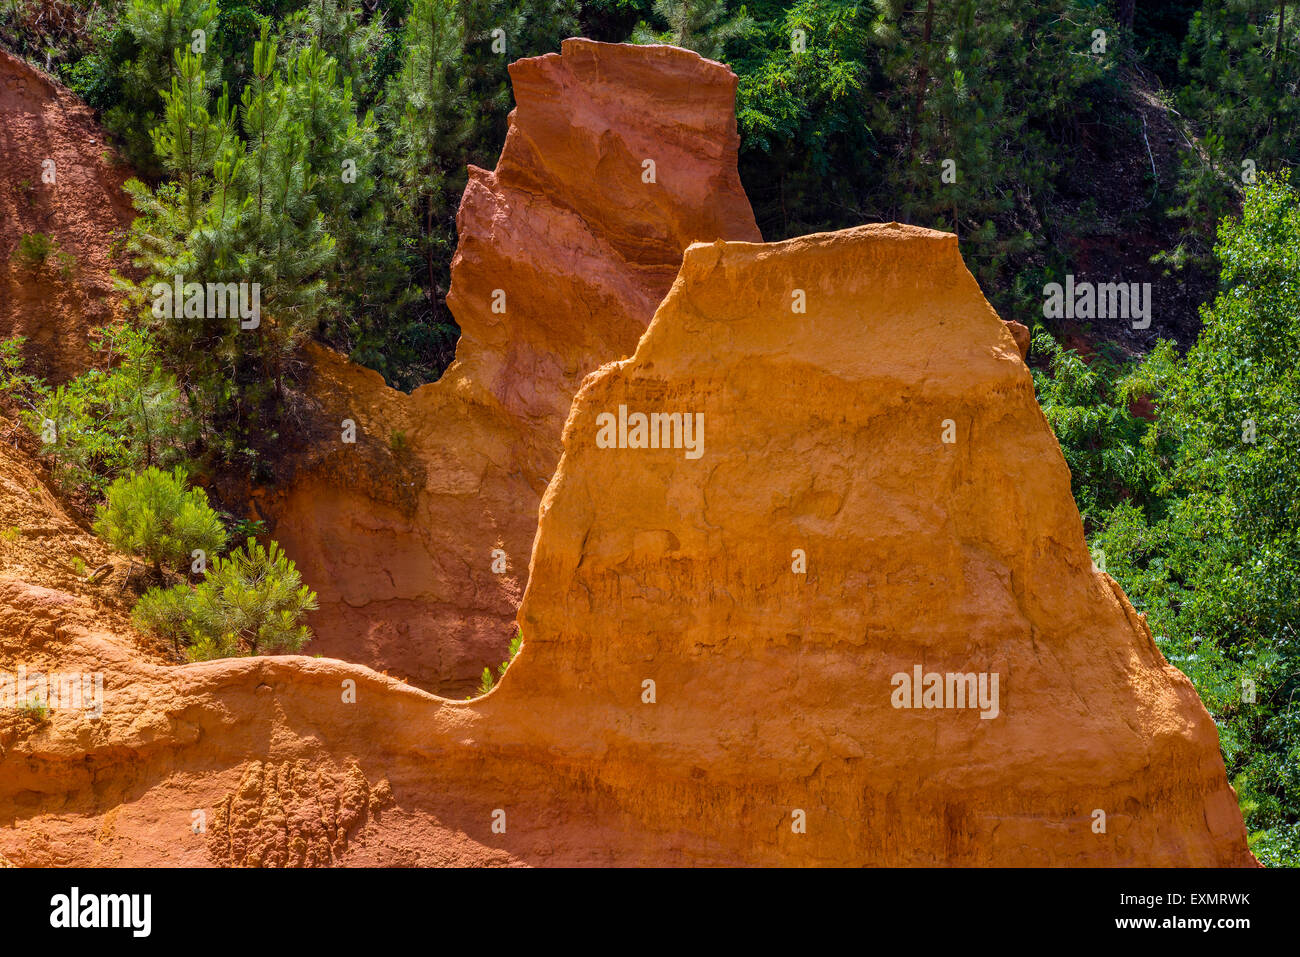 Ochre rocky formations along the Sentier des Ocres trail, Roussillon, Provence, France Stock Photo